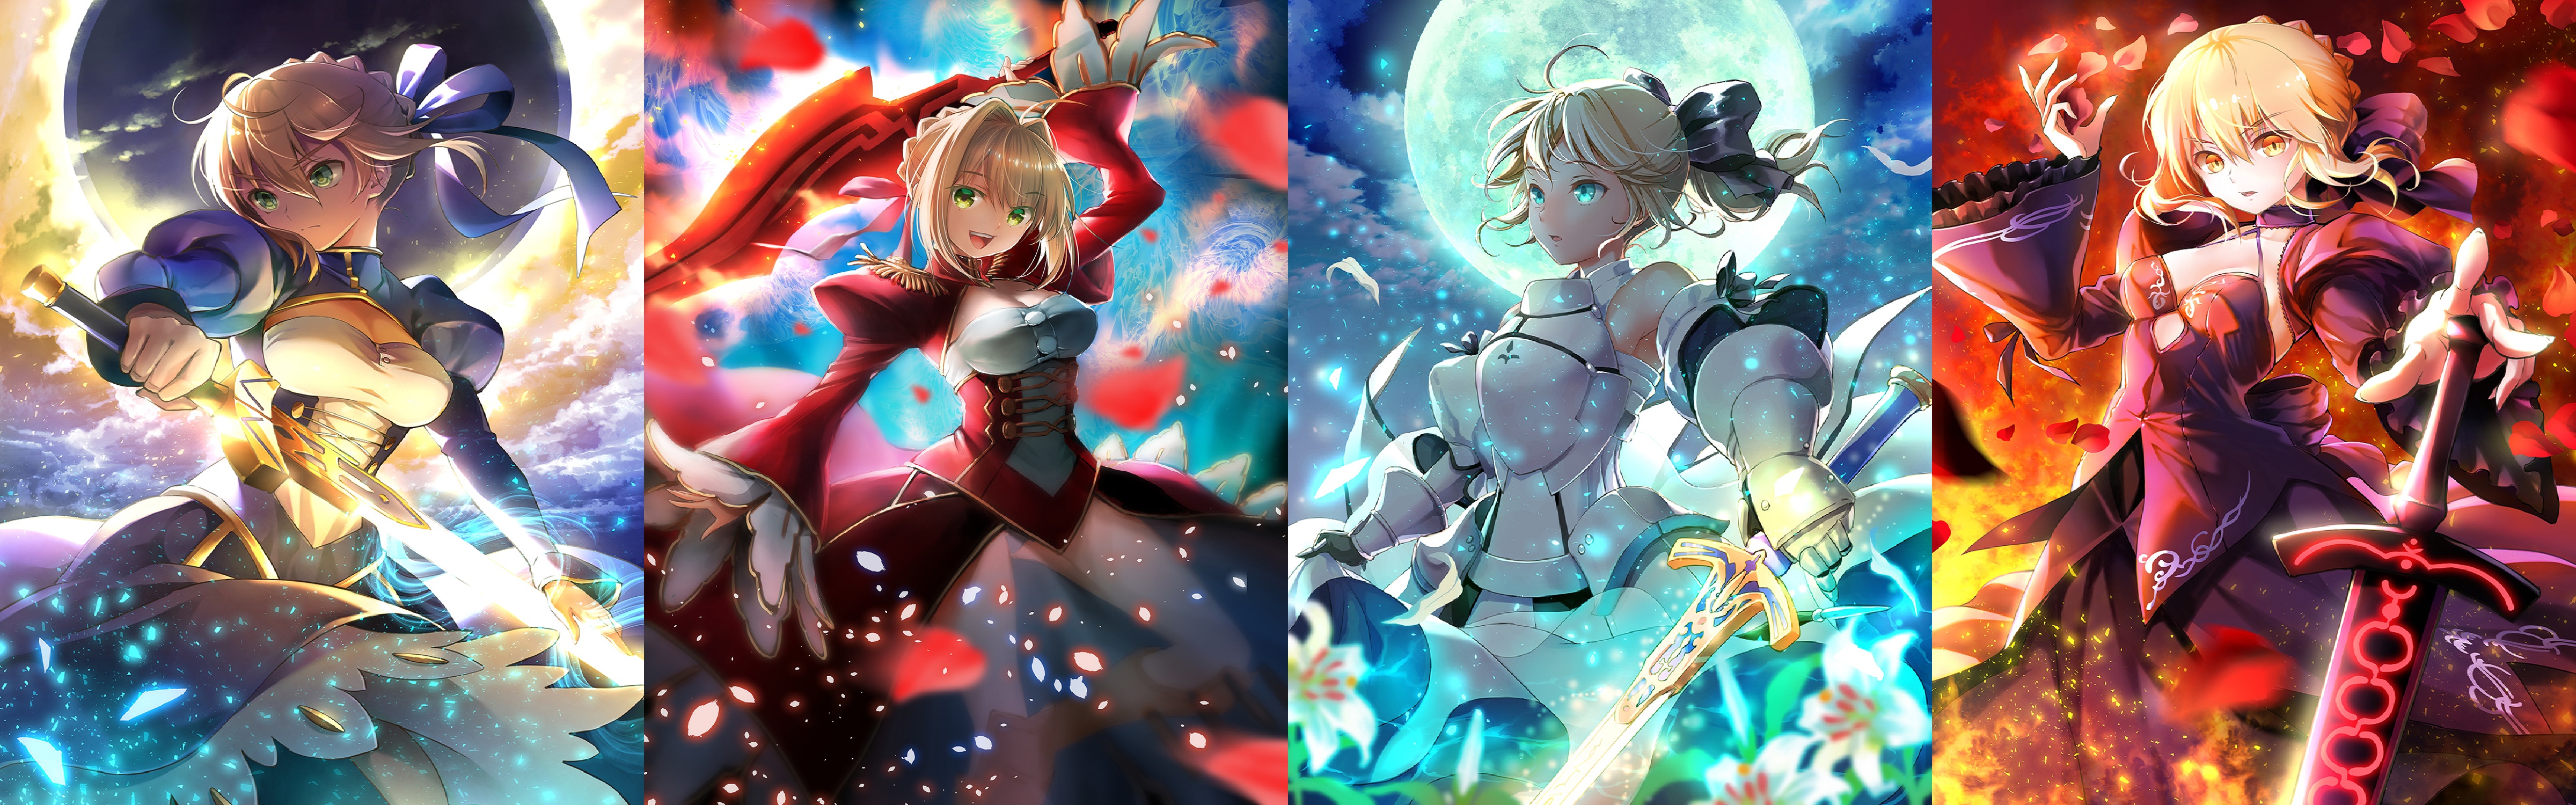 Anime 4800x1500 anime girls blonde Fate series Fate/Extra Fate/Grand Order Fate/Stay Night Fate/Unlimited Codes  Saber Artoria Pendragon Nero Claudius Saber Alter Saber Lily